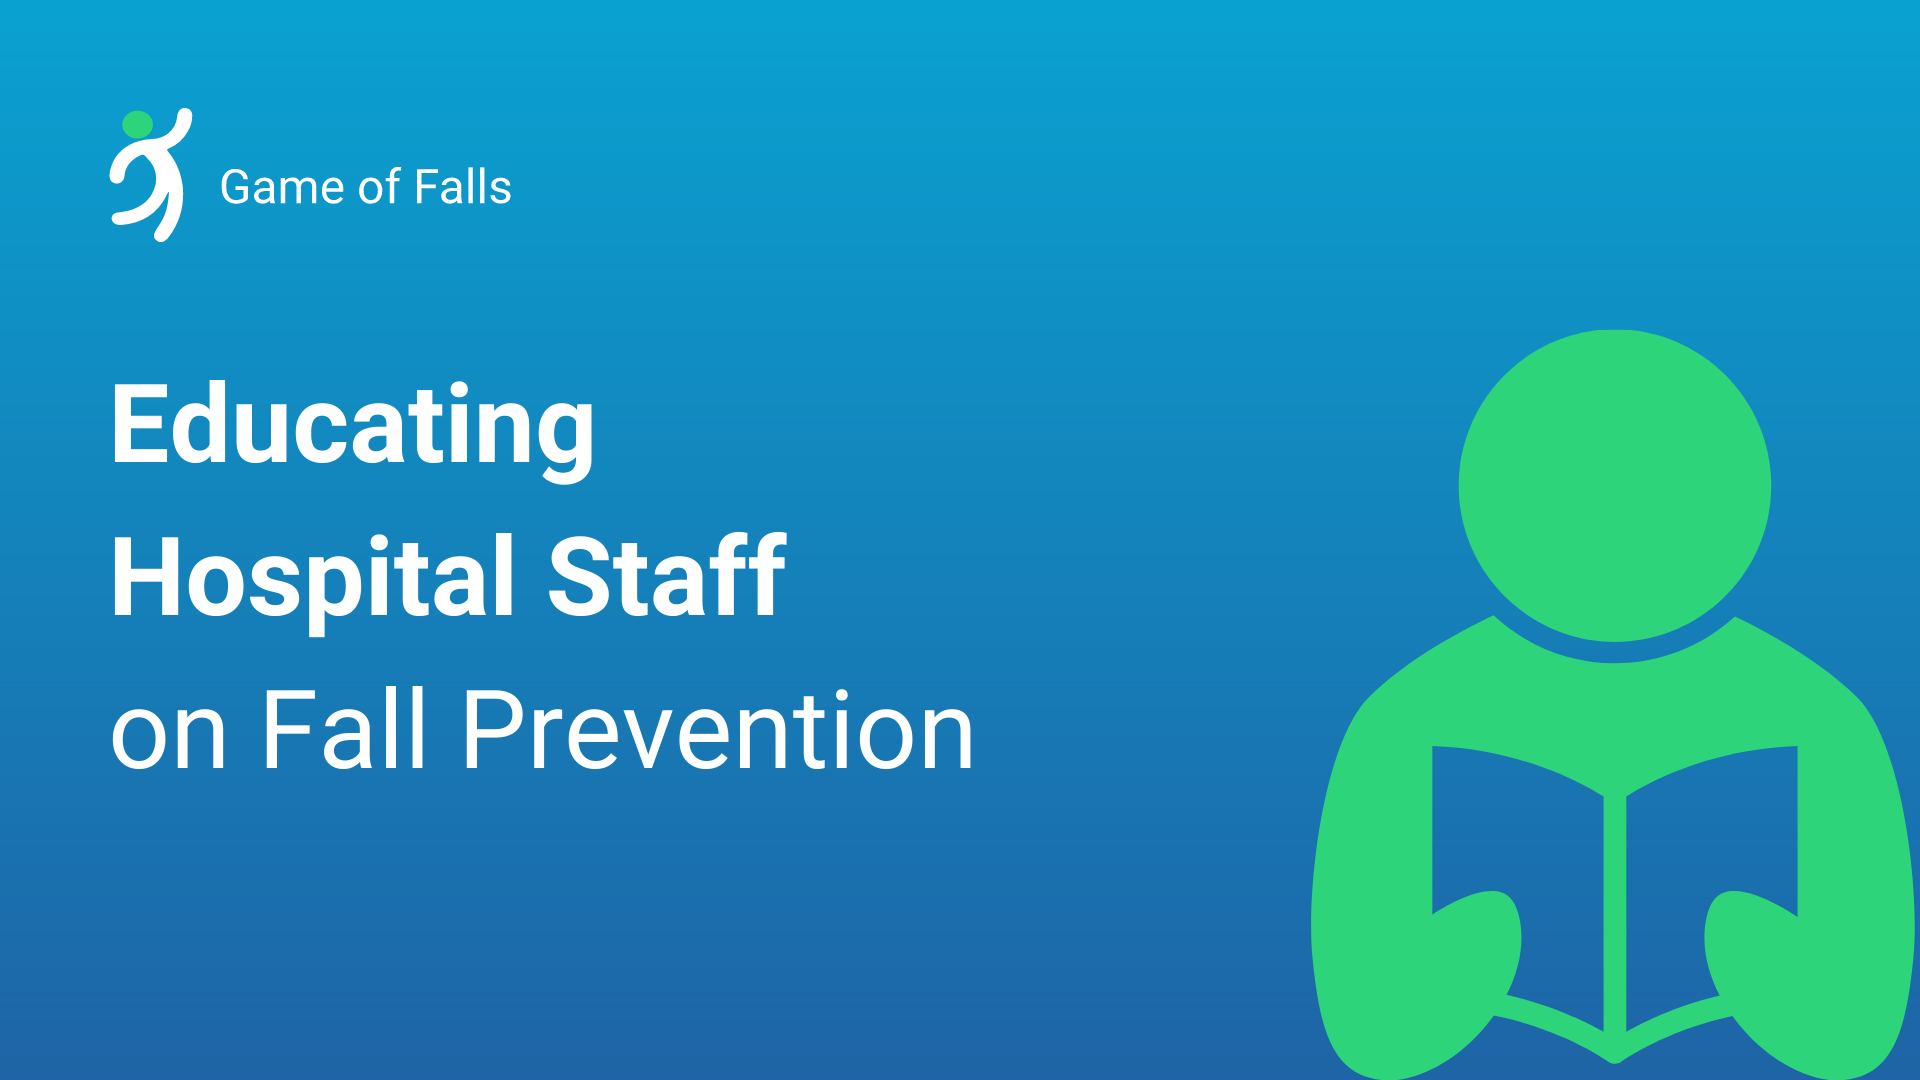 Educating Hospital Staff on Fall Prevention